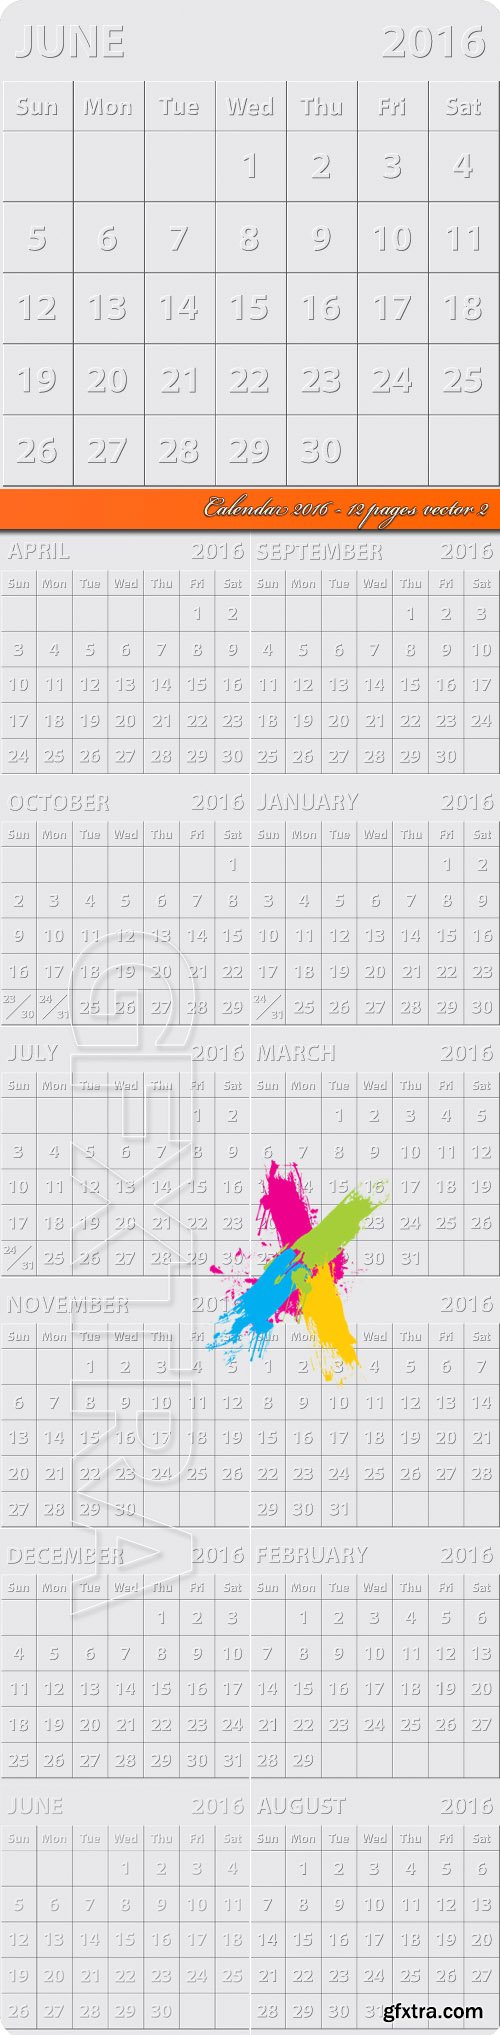 Calendar 2016 - 12 pages vector 2